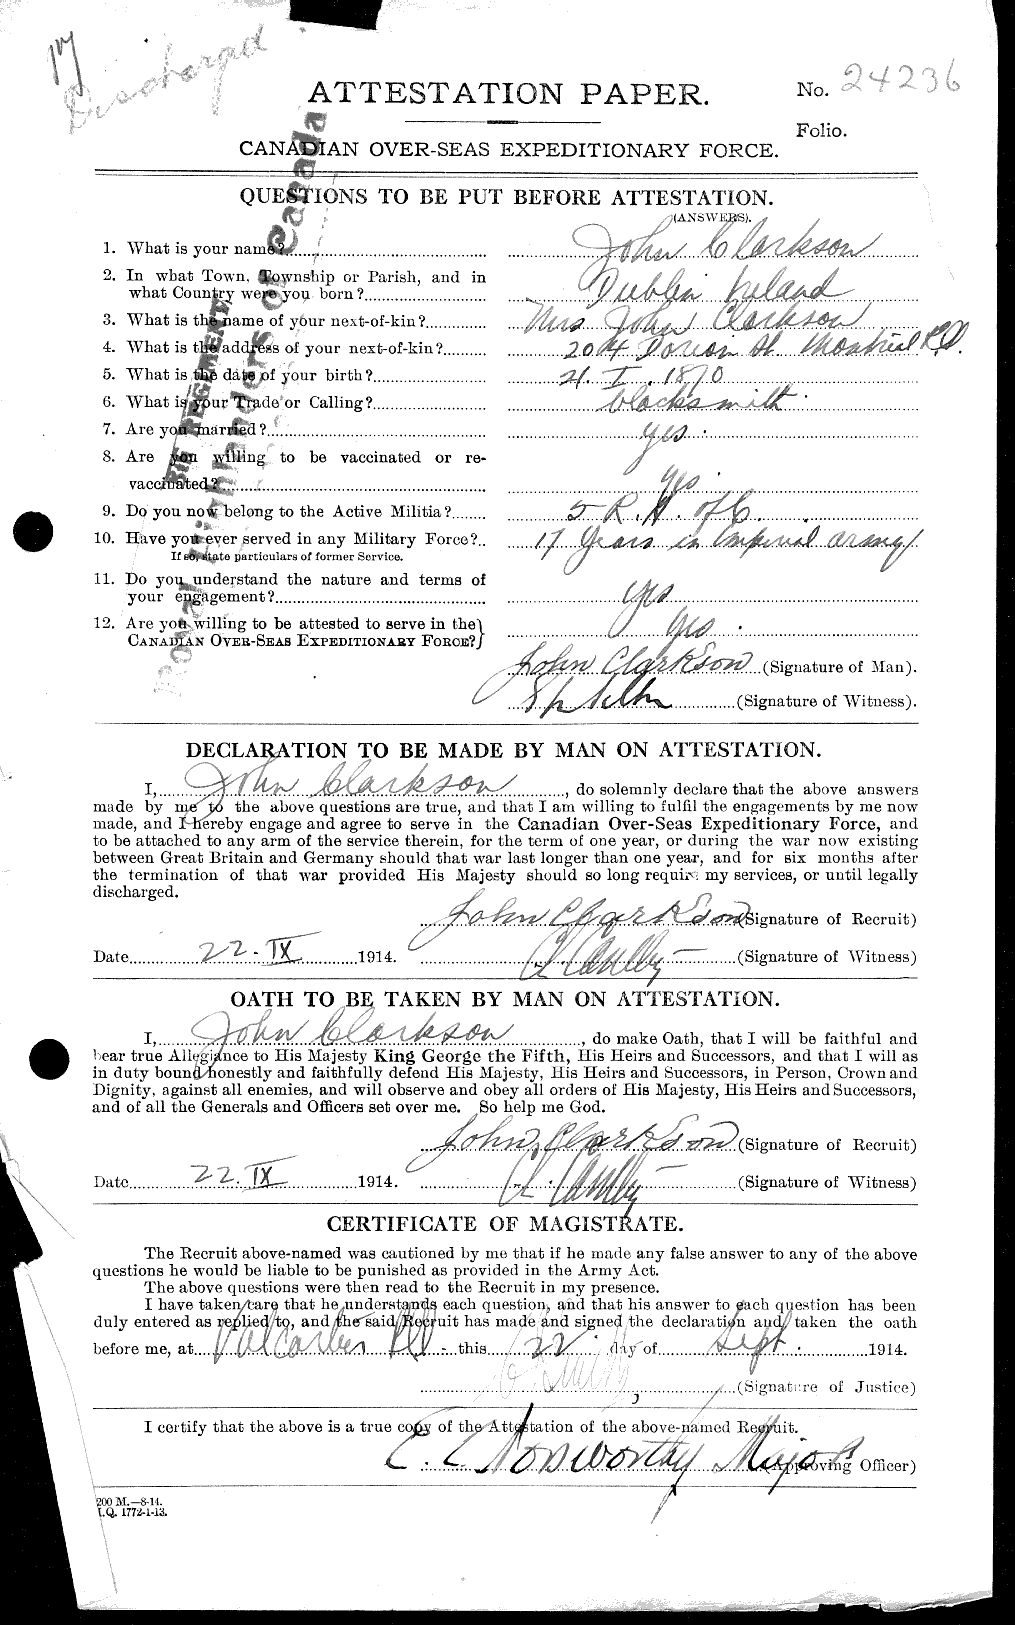 Personnel Records of the First World War - CEF 021451c